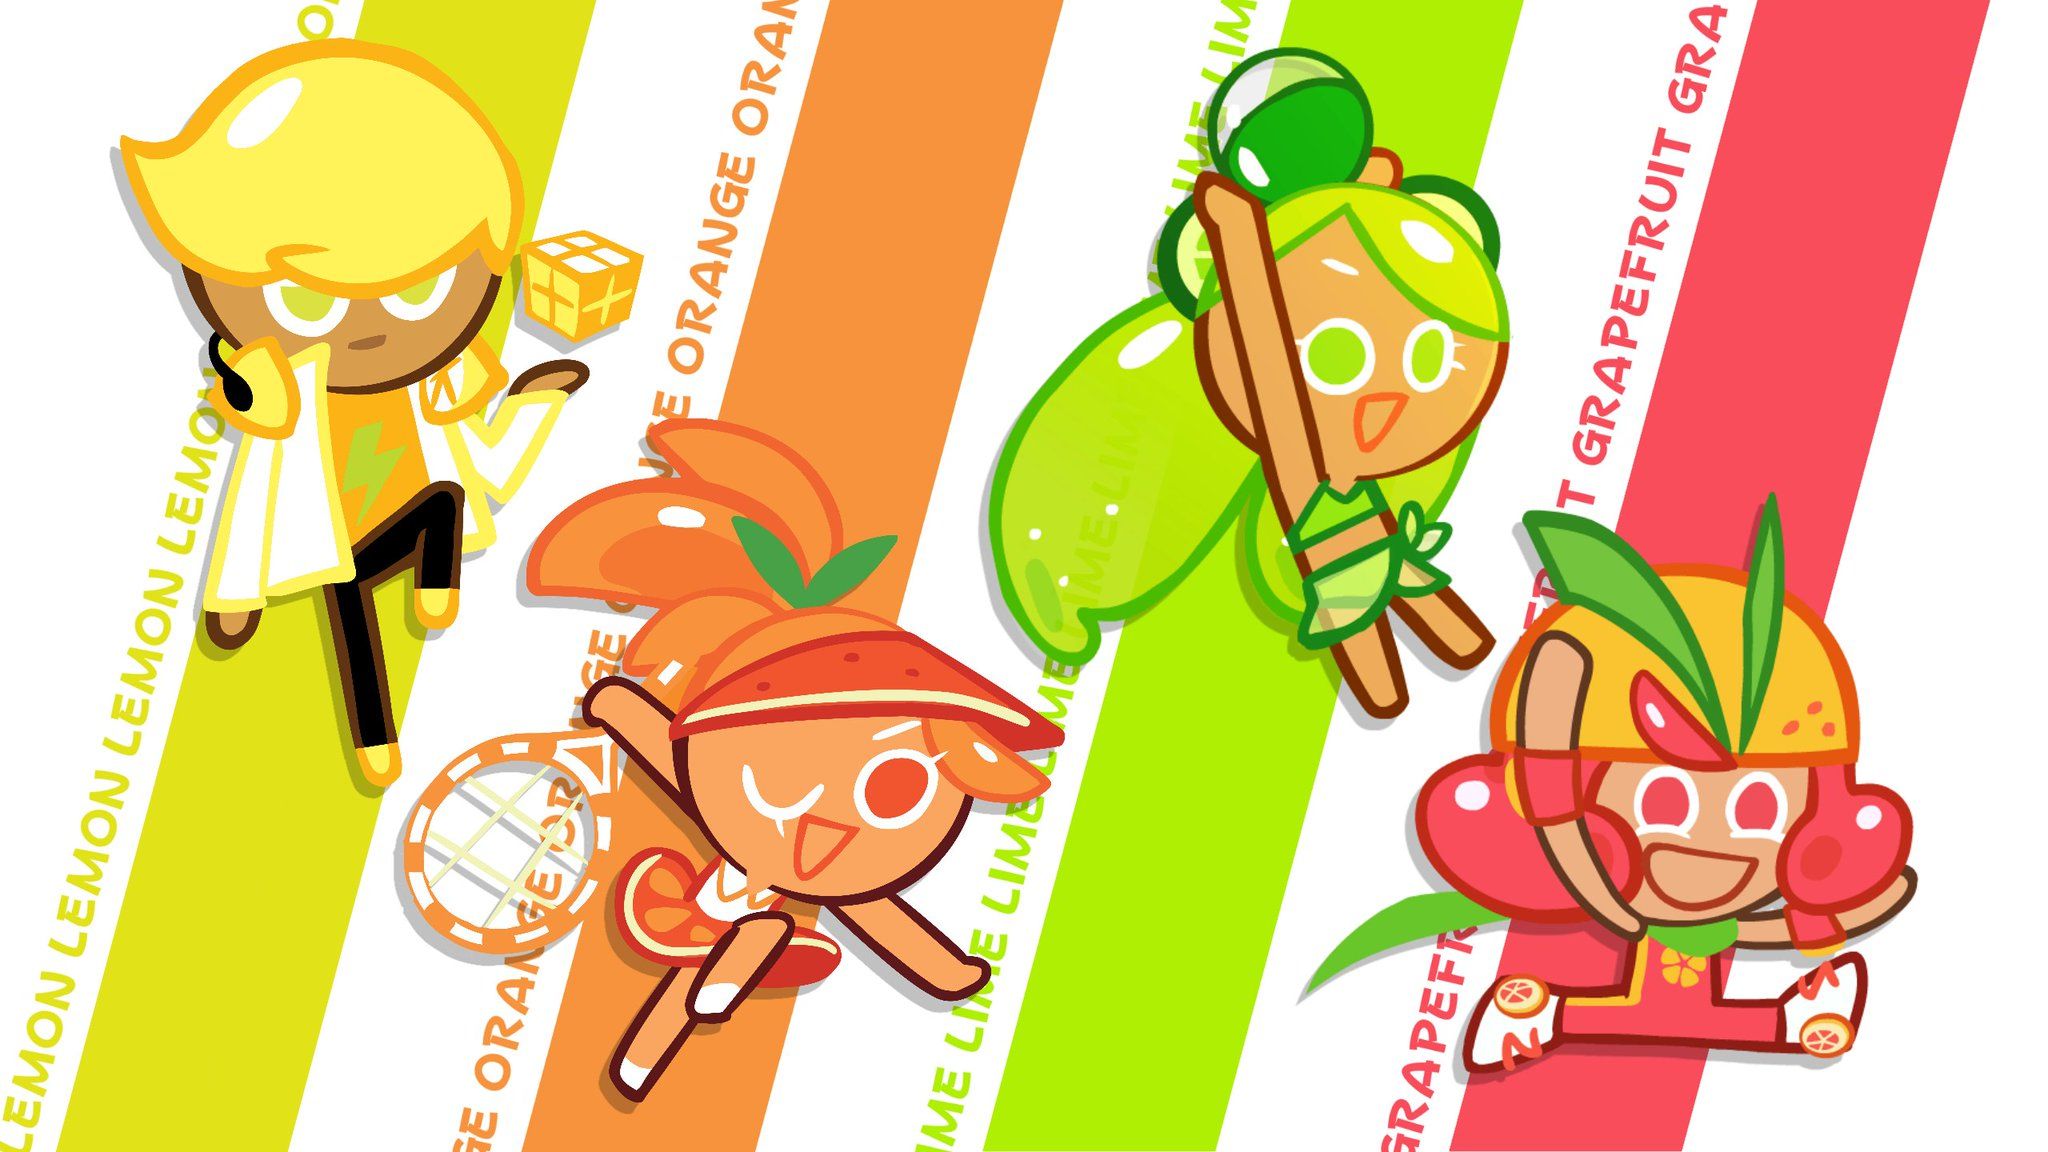 CookieRun on Twitter: Need a new wallpapers for summer? ☀️ Check out these cool wallpapers by PEPPERA629! Visit the Forum for more: https://t.co/6oTswJAJZ6… https://t.co/wwsQ9LGcHH